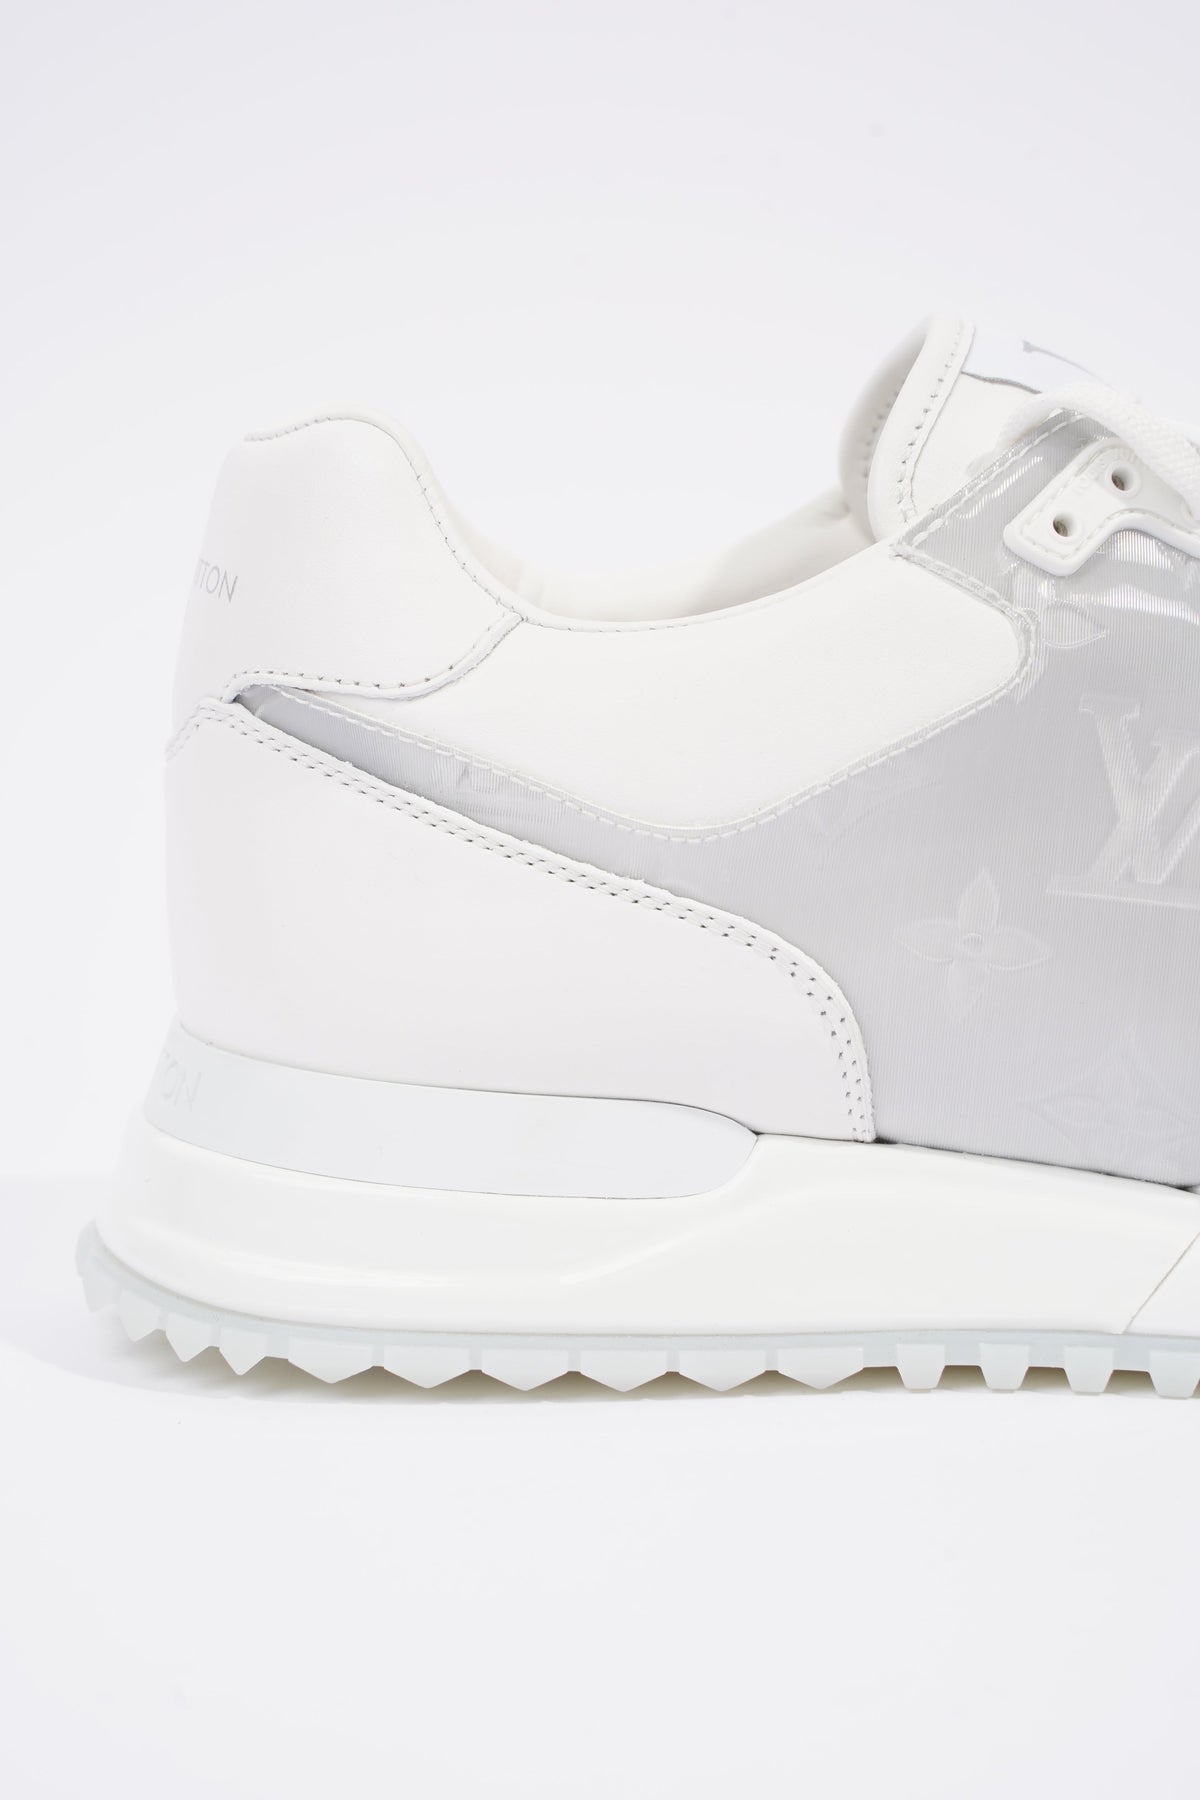 Louis Vuitton - Authenticated Run Away Trainer - Leather White for Men, Very Good Condition